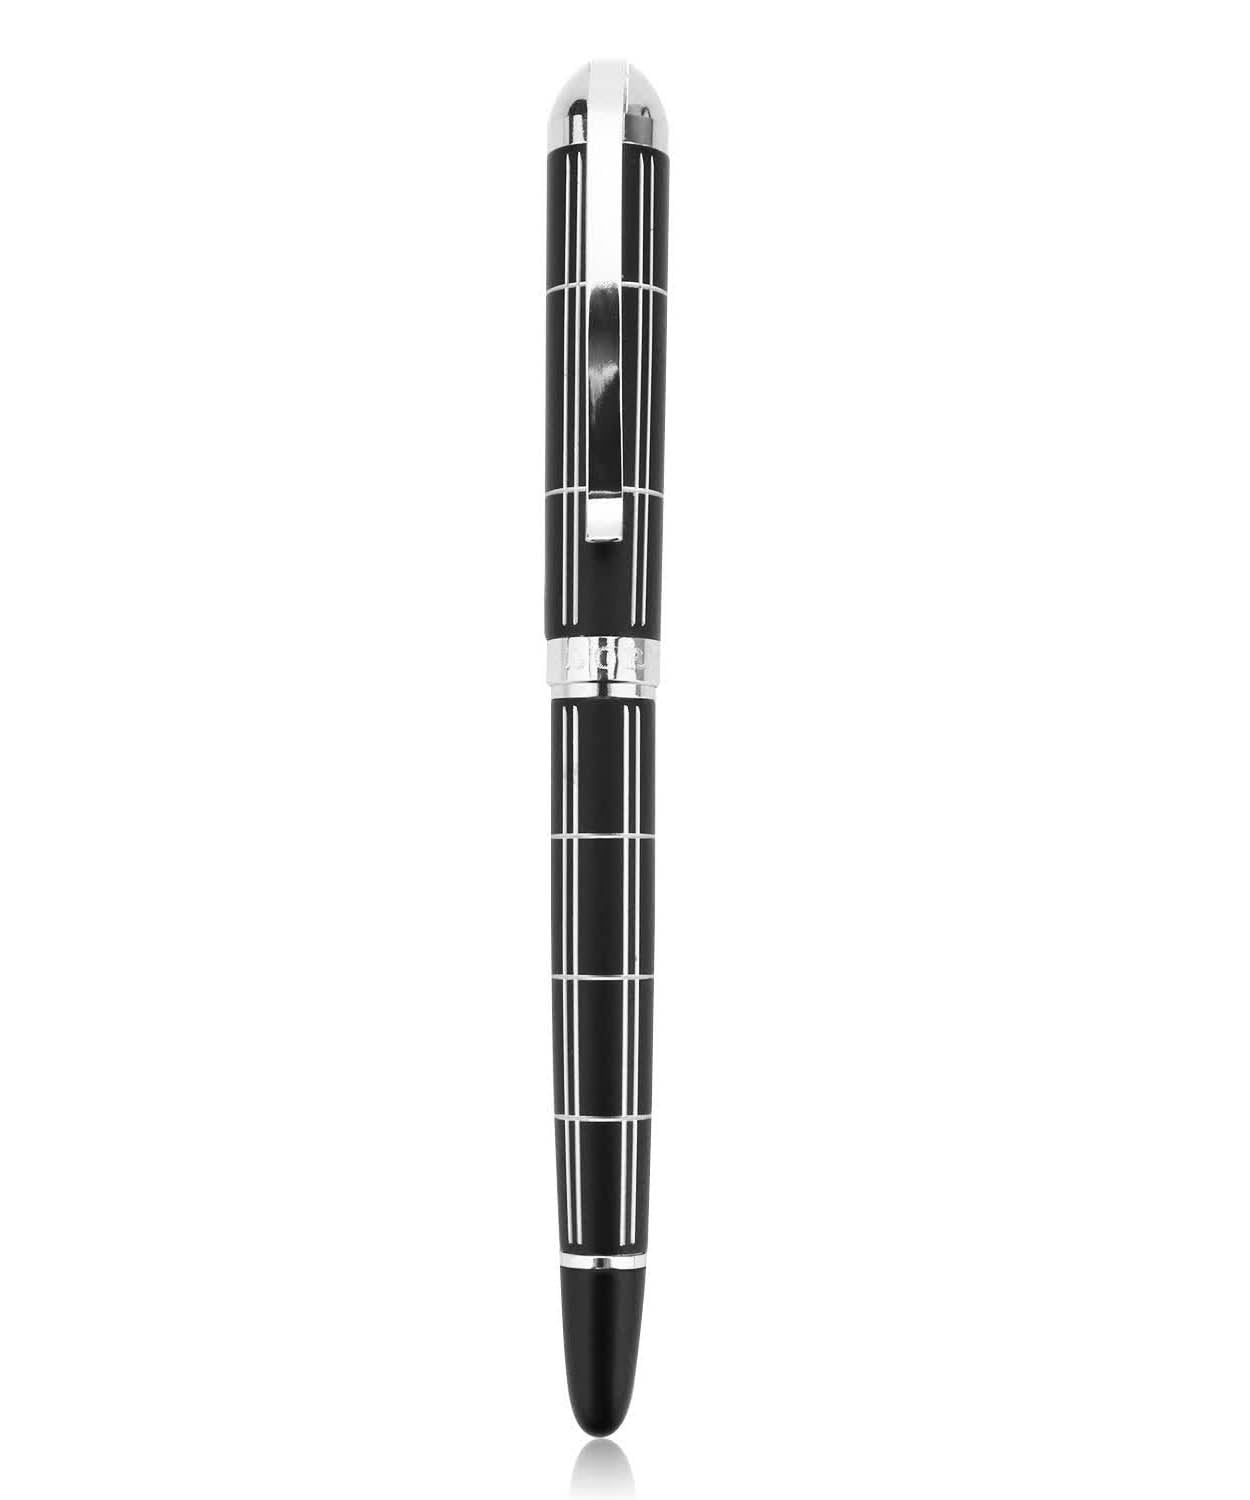 Croton Ballpoint Pen With Laser Cut Grooves In Matte Black and Chrome Accents View 1